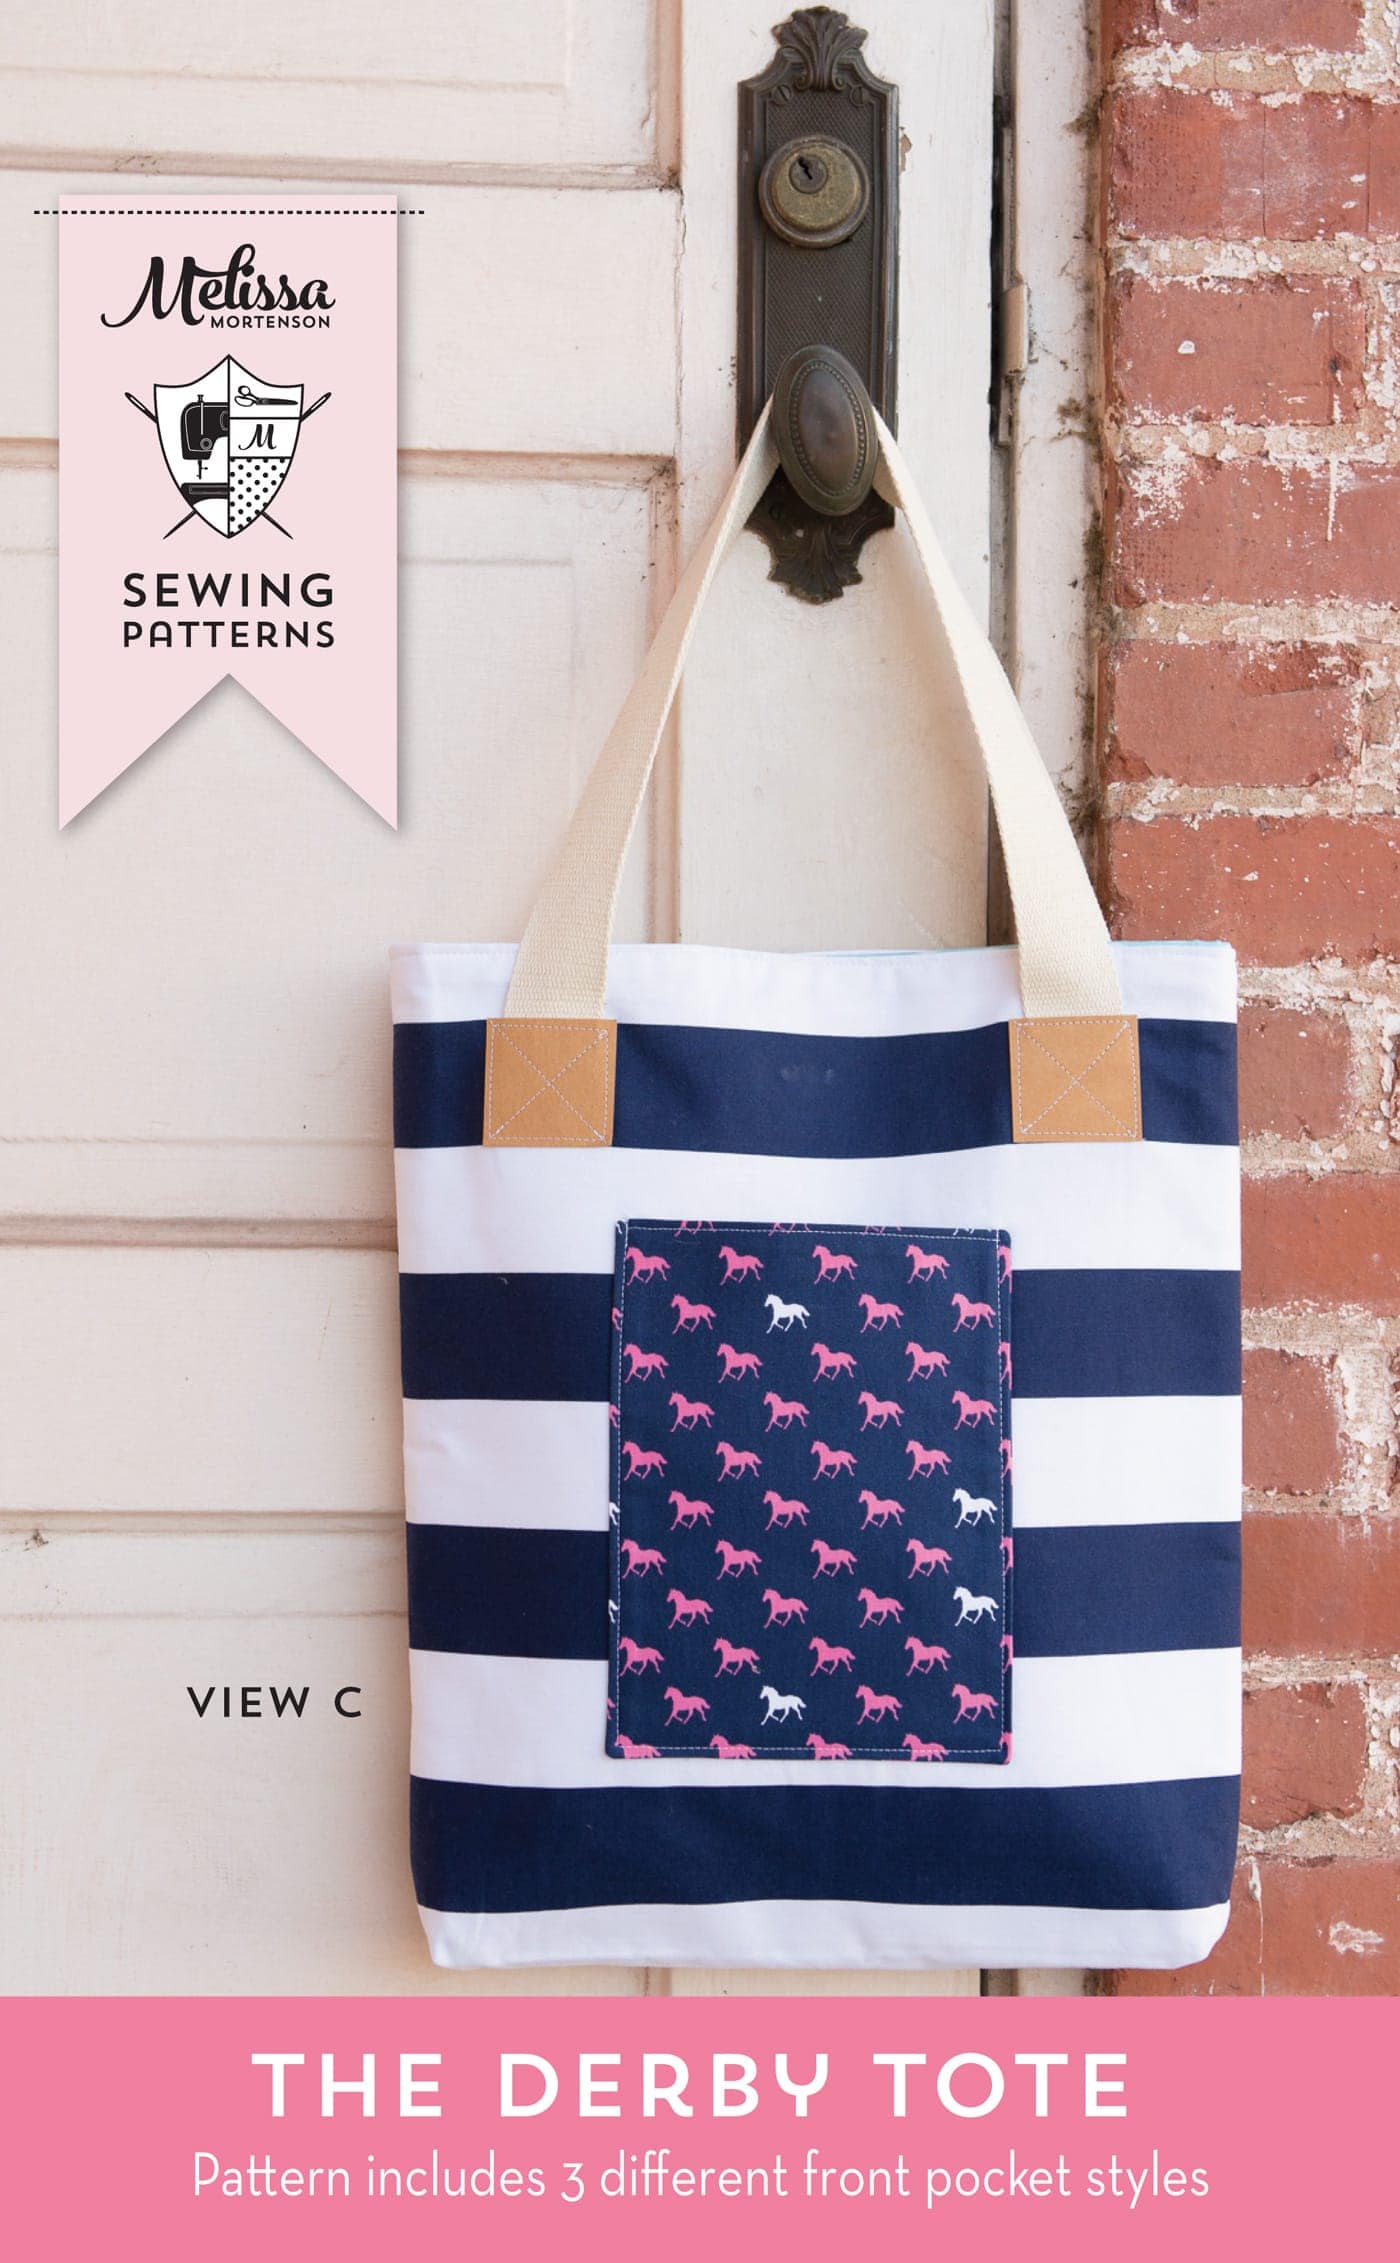 Tote Bag With Pockets